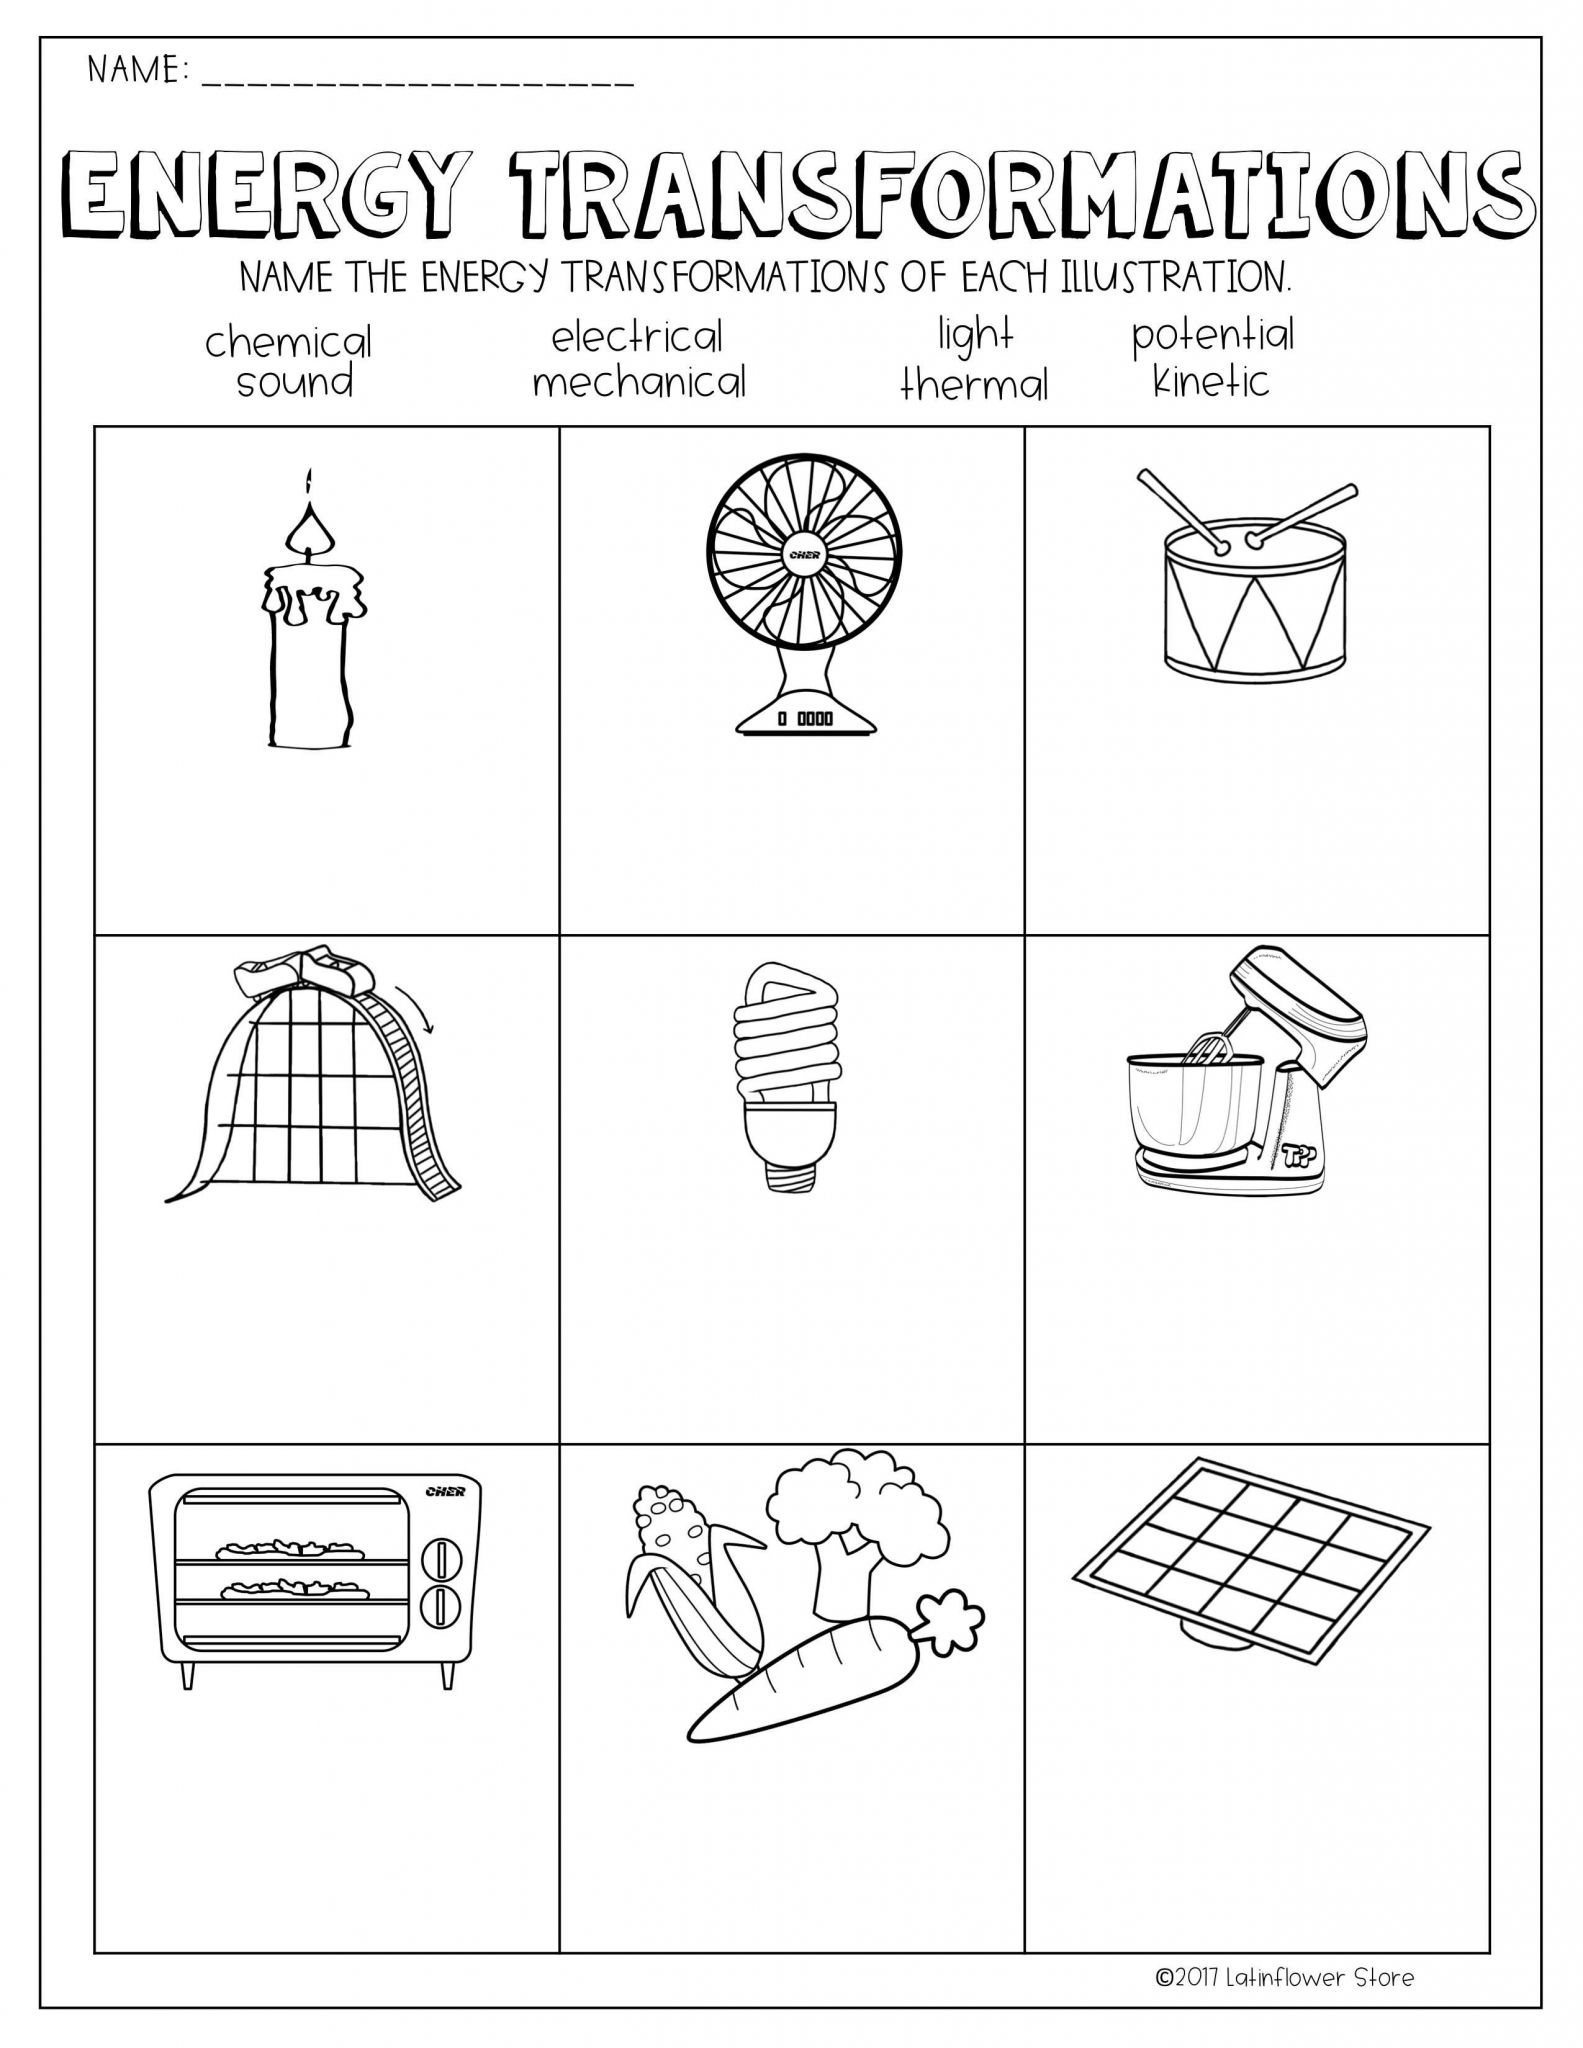 Conduction Convection or Radiation Worksheet Answers Along with Science Worksheet Heat Energy Valid Energy Transformations